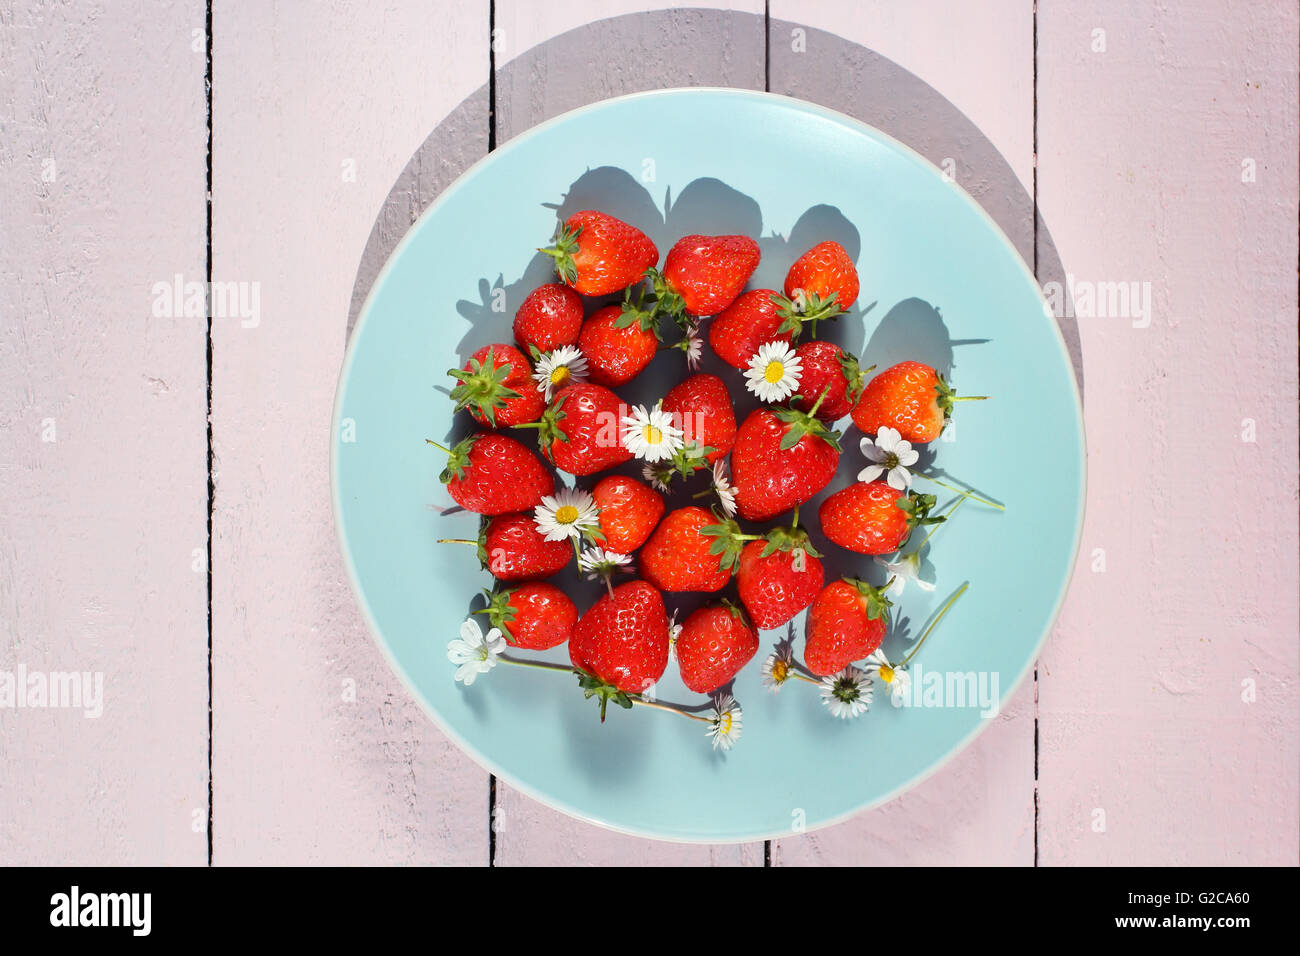 Ripe red strawberries on a blue ceramic plate and pink wooden background Stock Photo